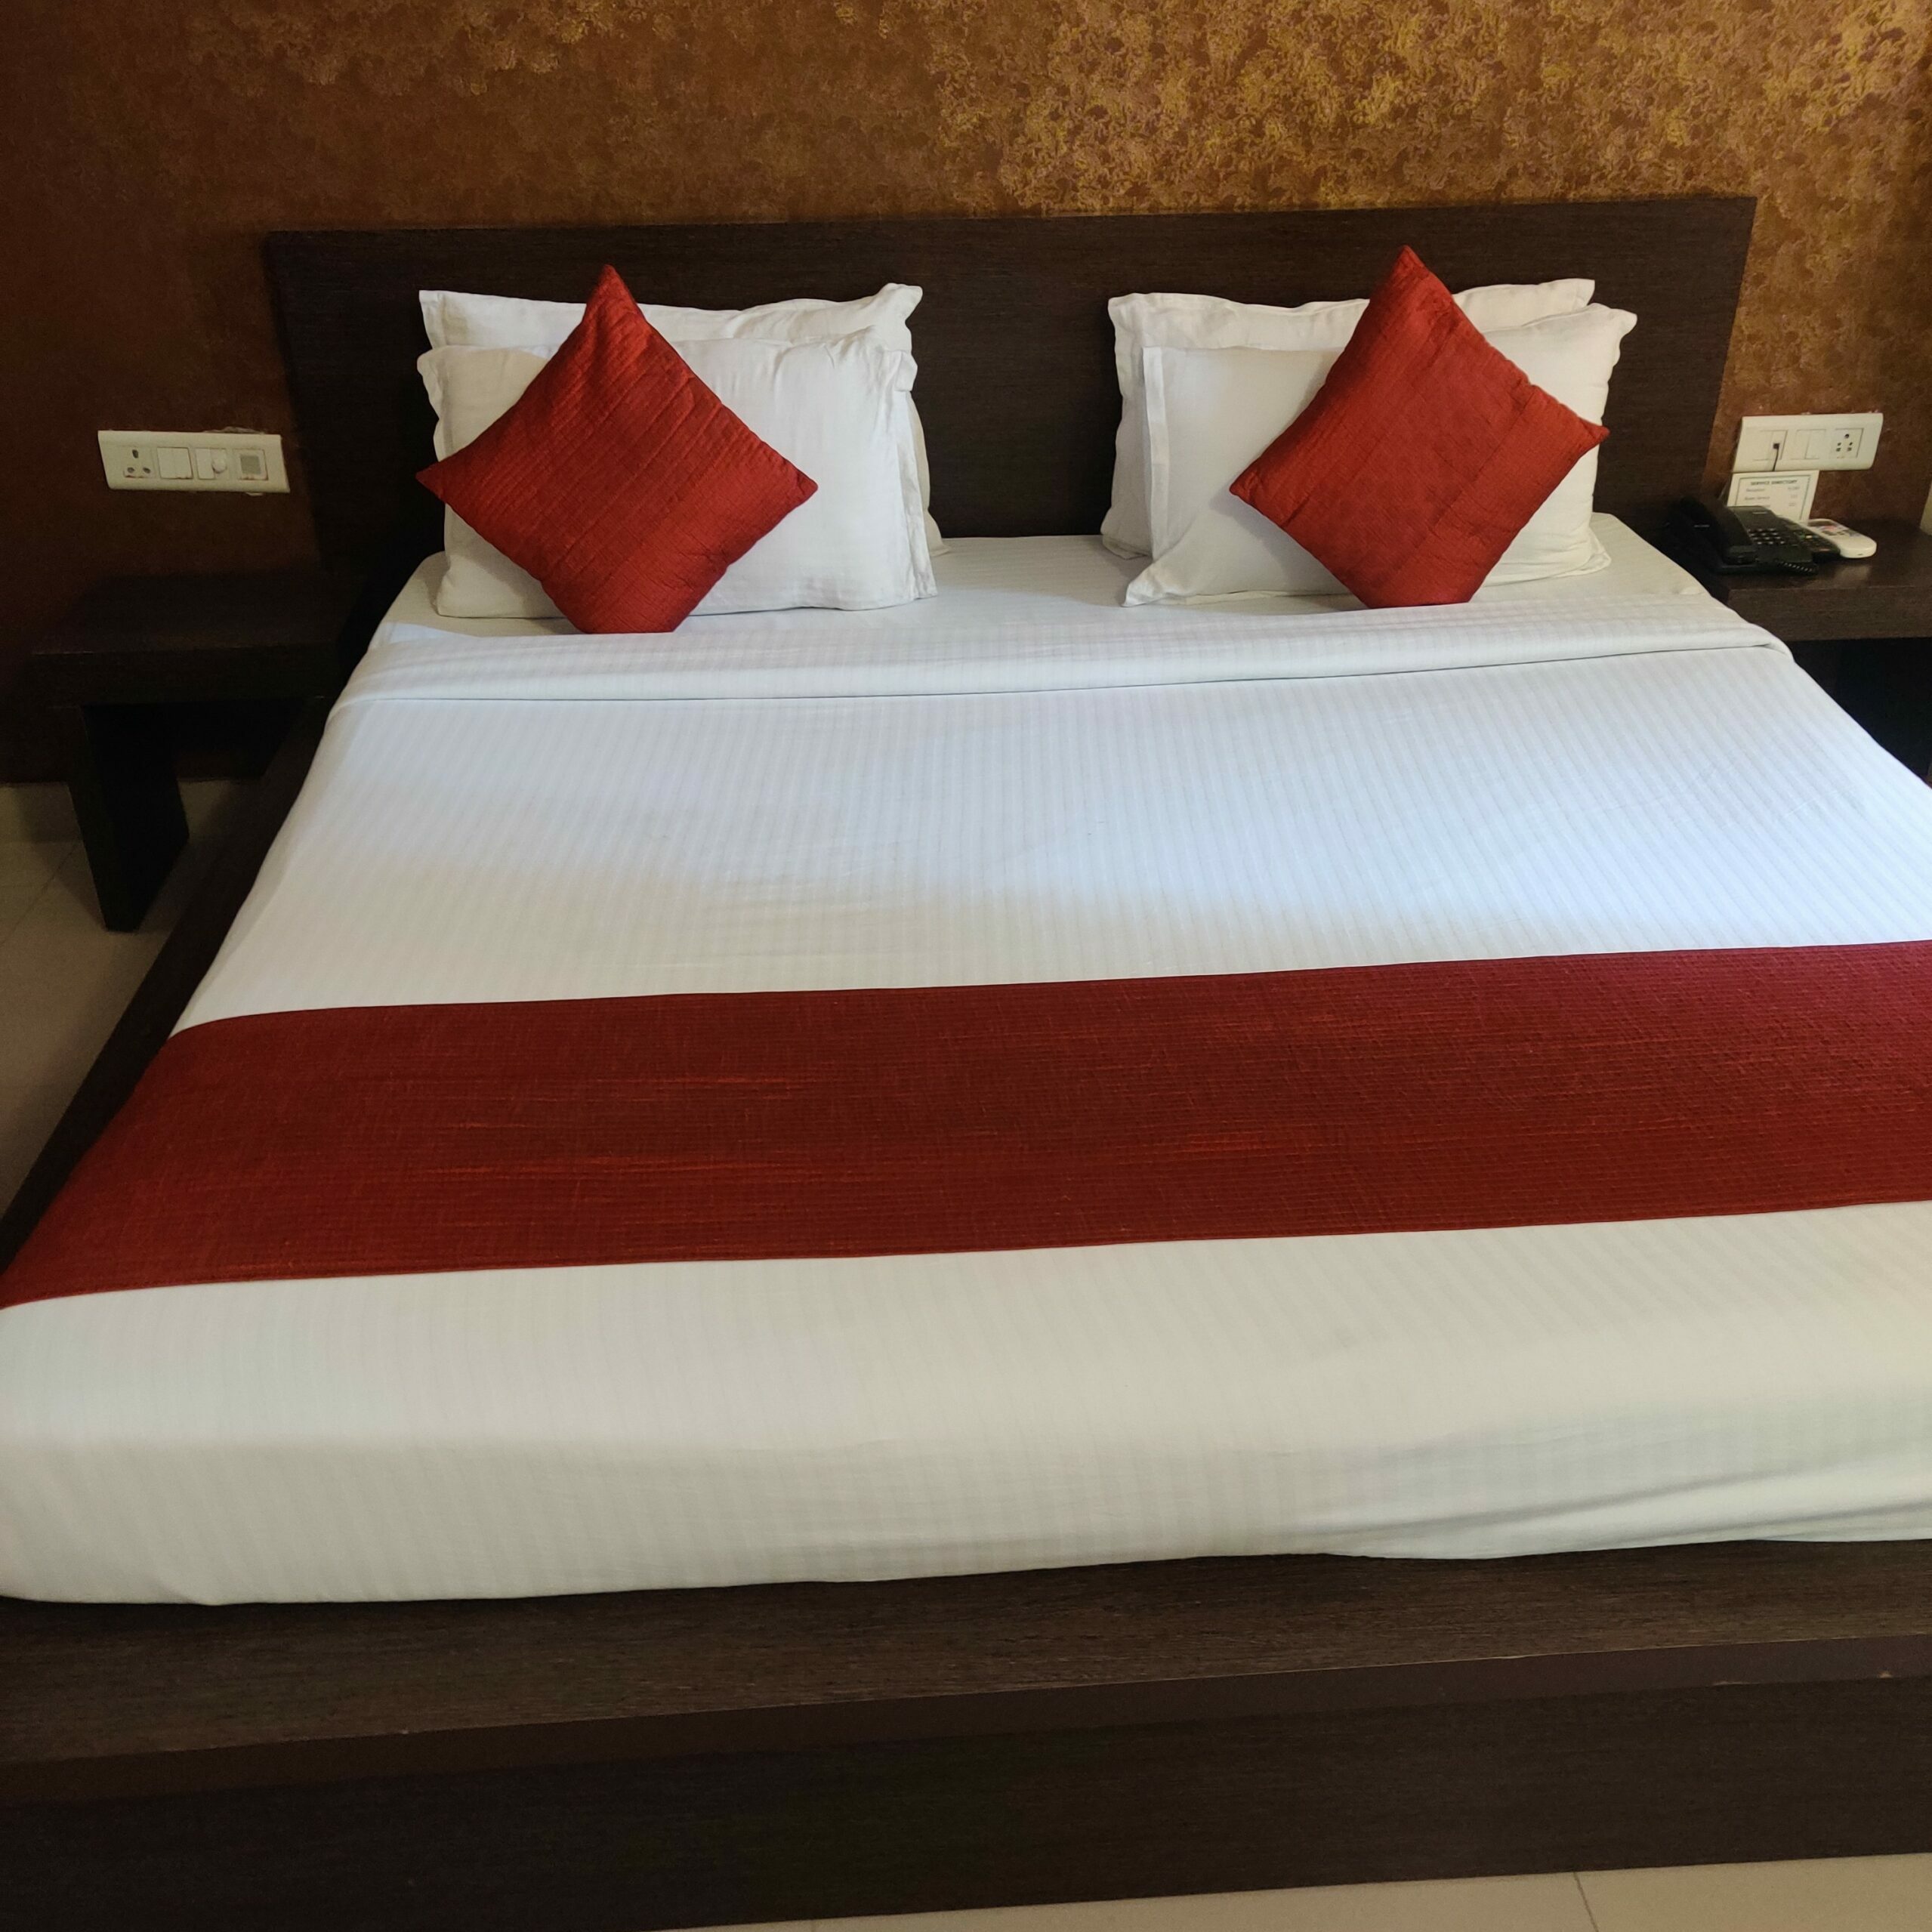 Comfort and Relaxed stay at hotel in Jaipur